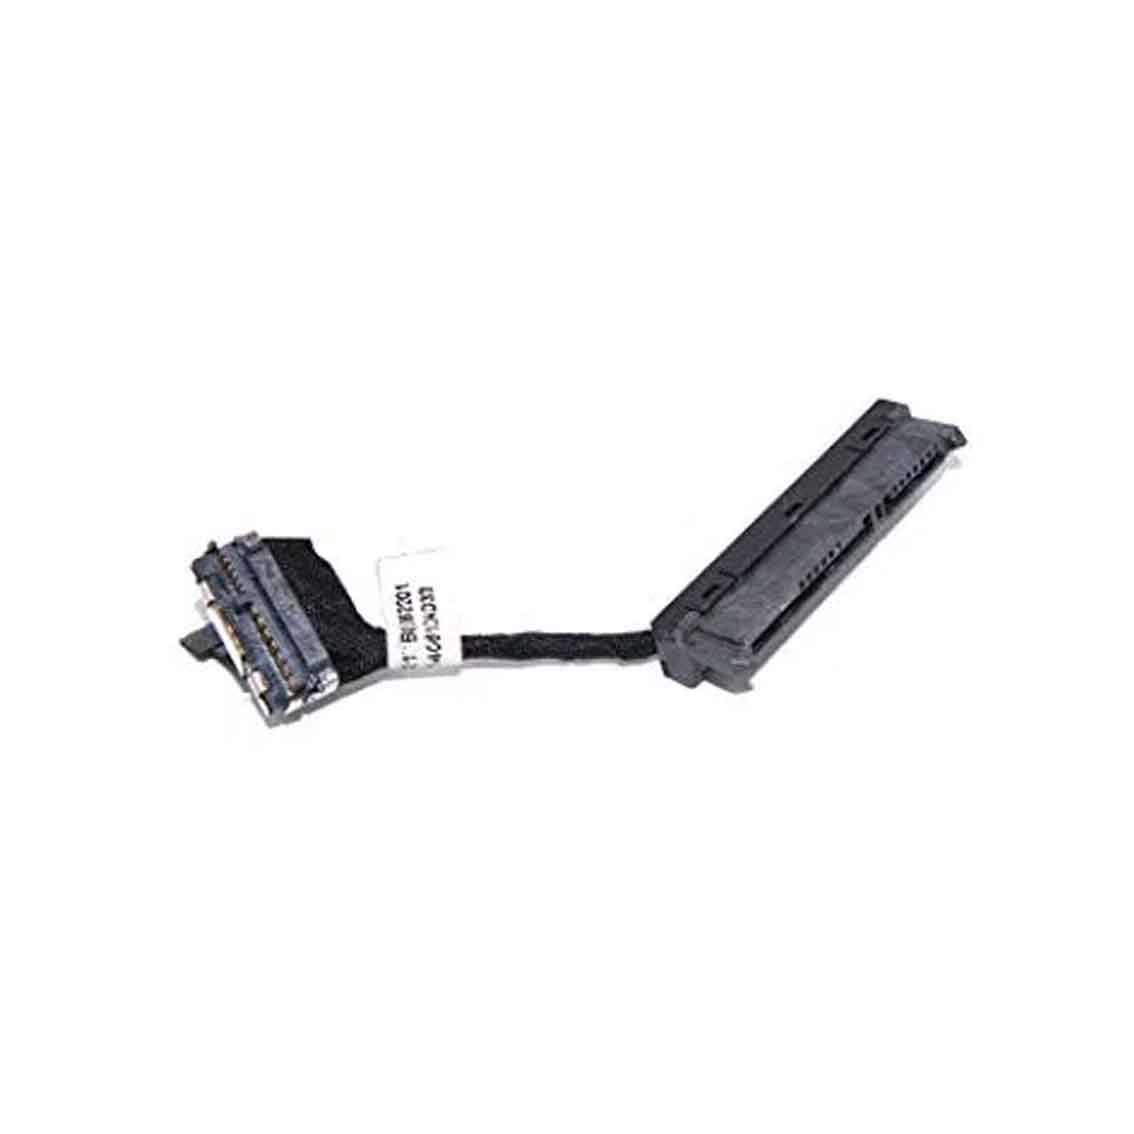 640 Laptop Hard Disk Connector - Infovision